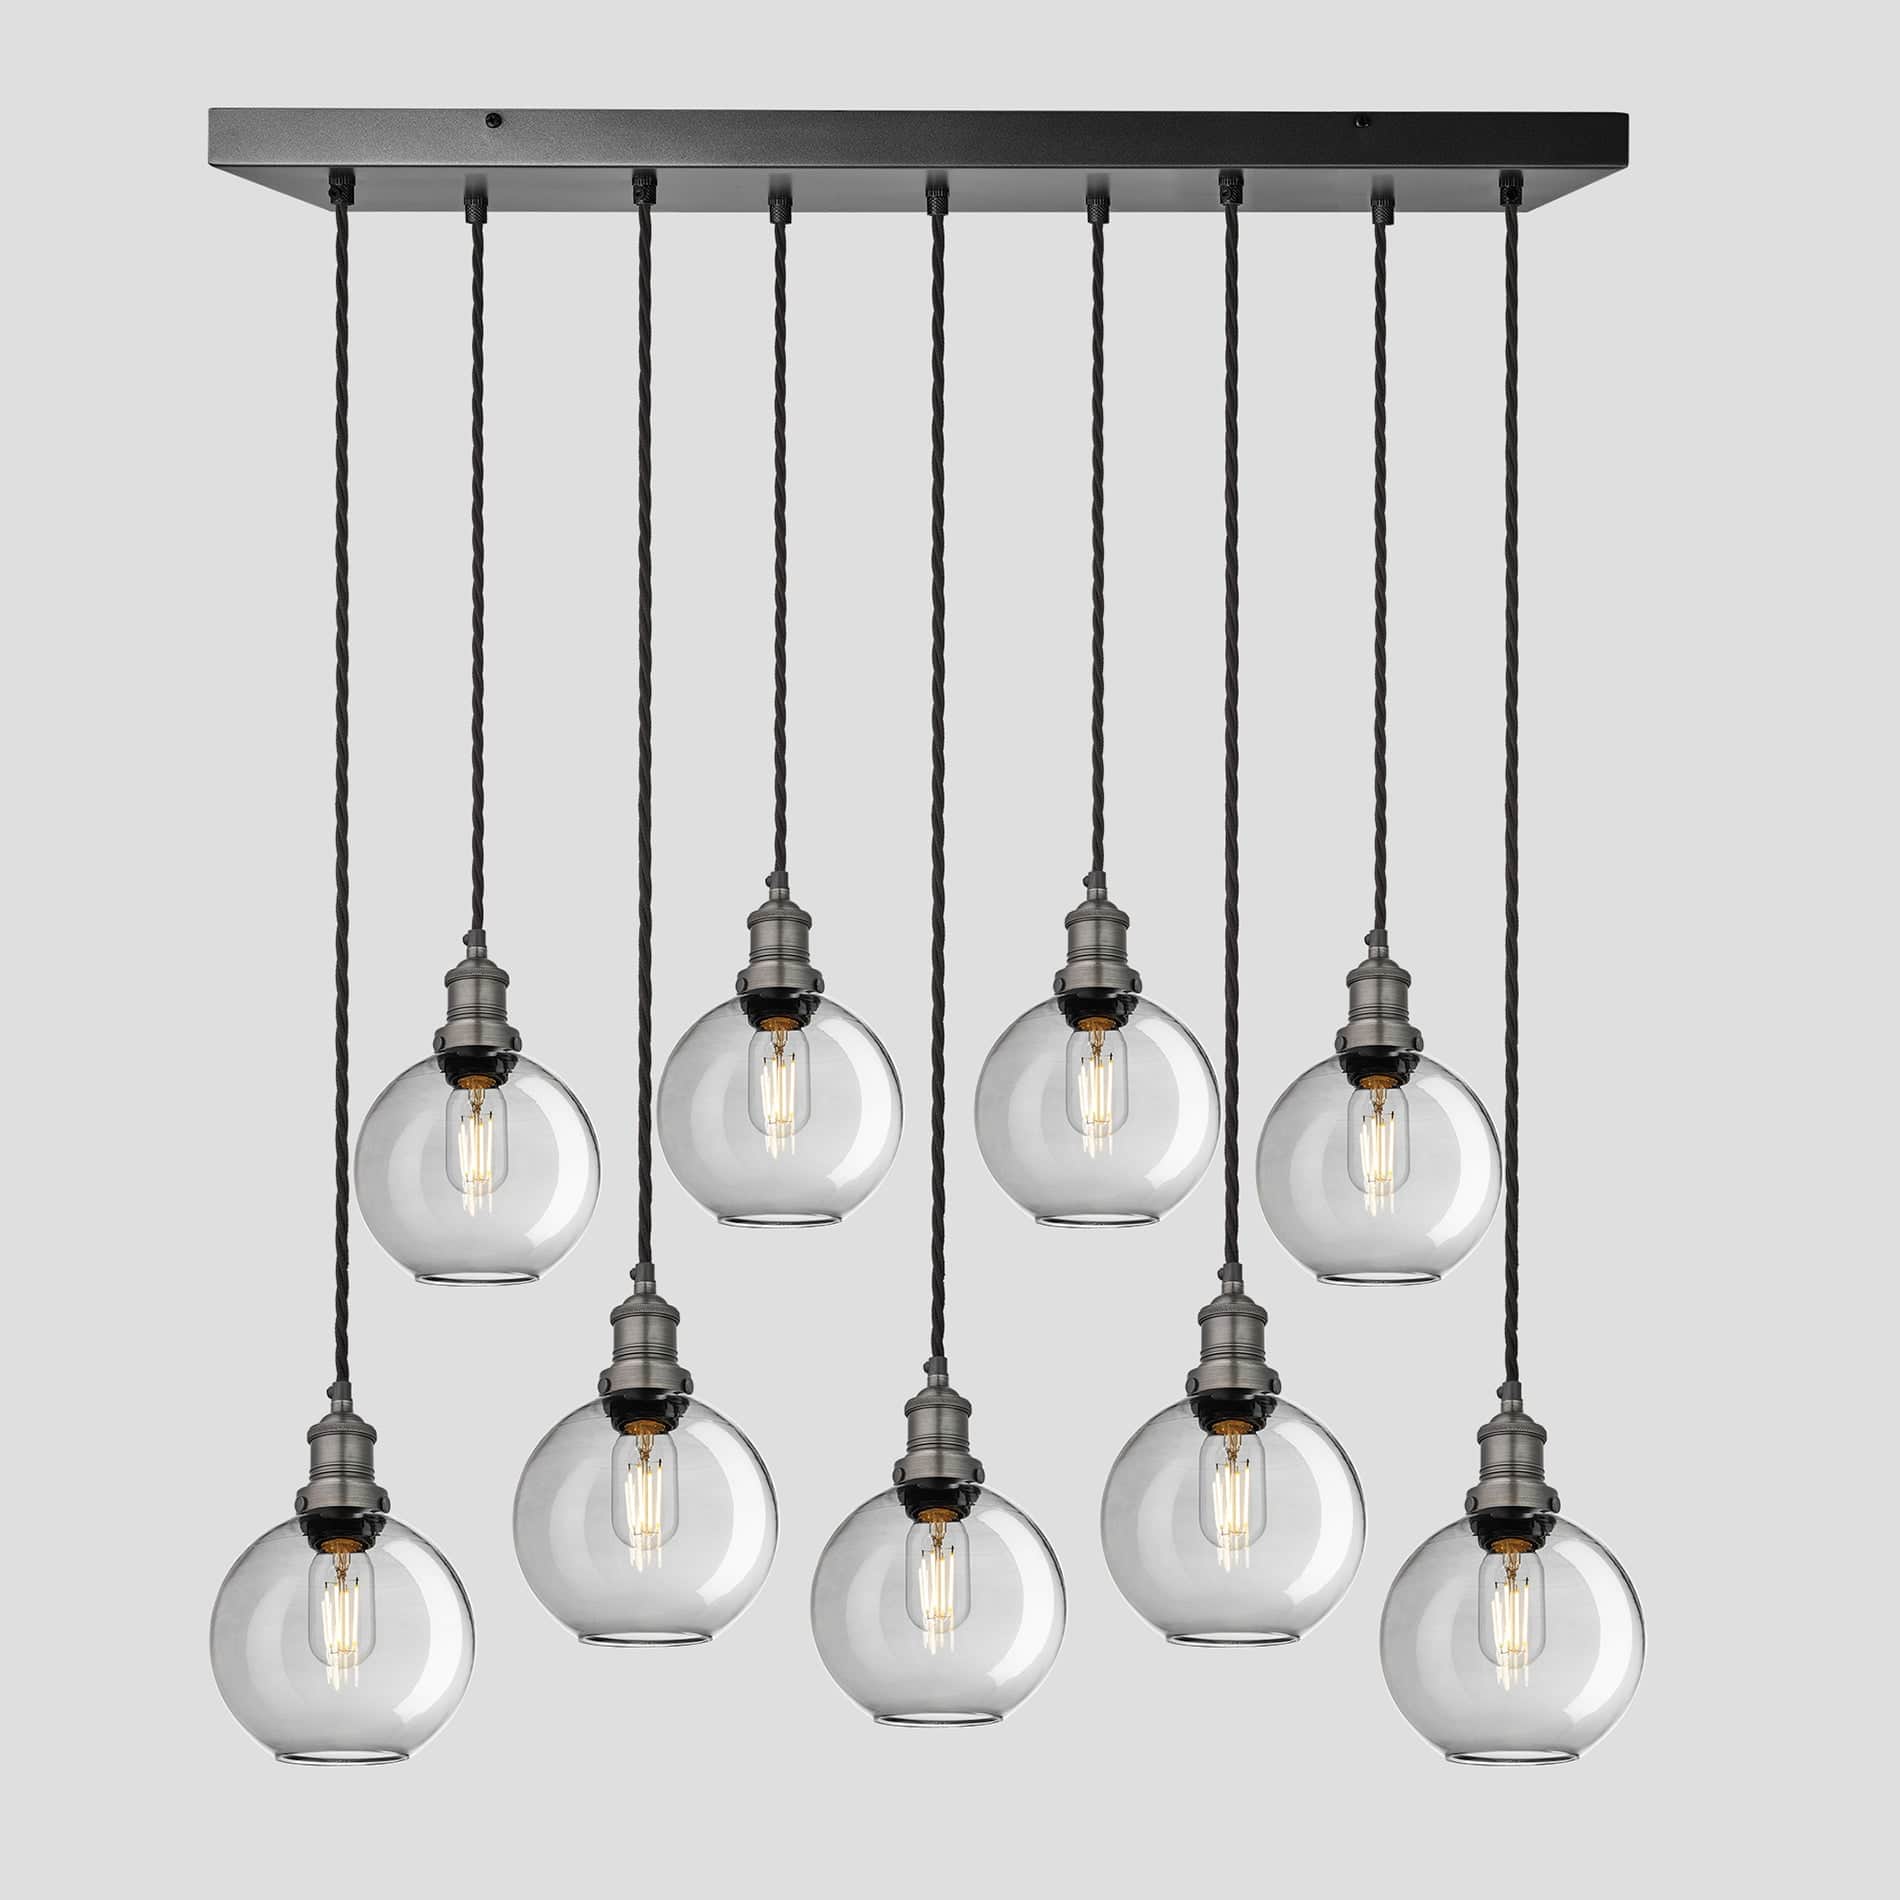 Brooklyn Tinted Glass Globe 9 Wire Cluster Lights - 7 inch - Smoke Grey Industville BR-TGL-GL7-9WCL-SG-PH